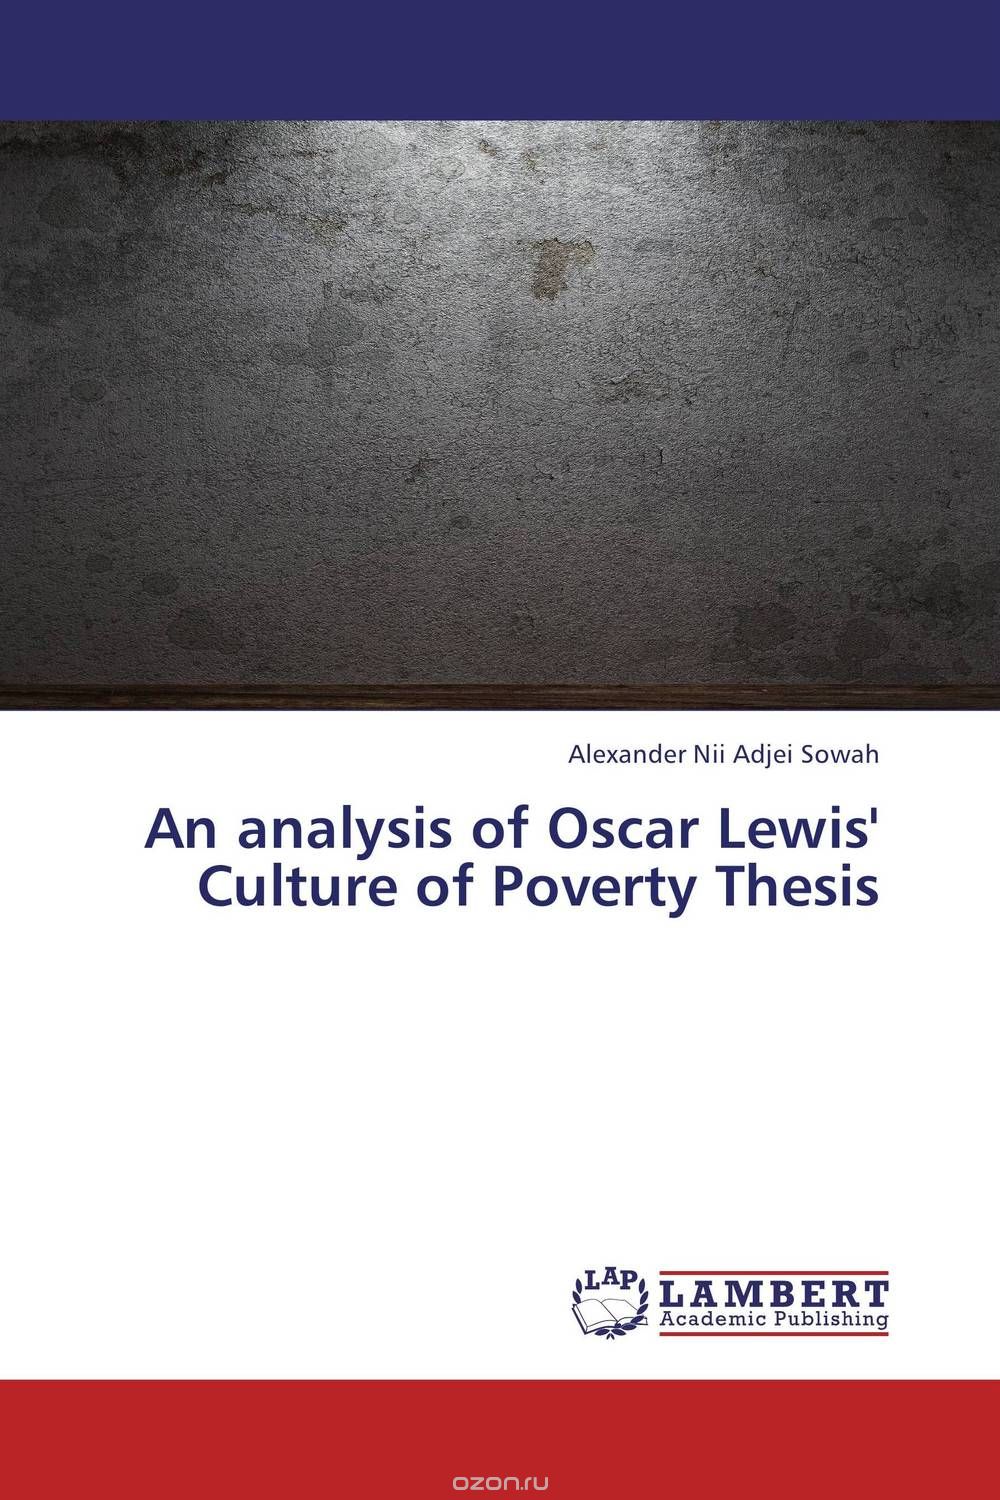 An analysis of Oscar Lewis' Culture of Poverty Thesis